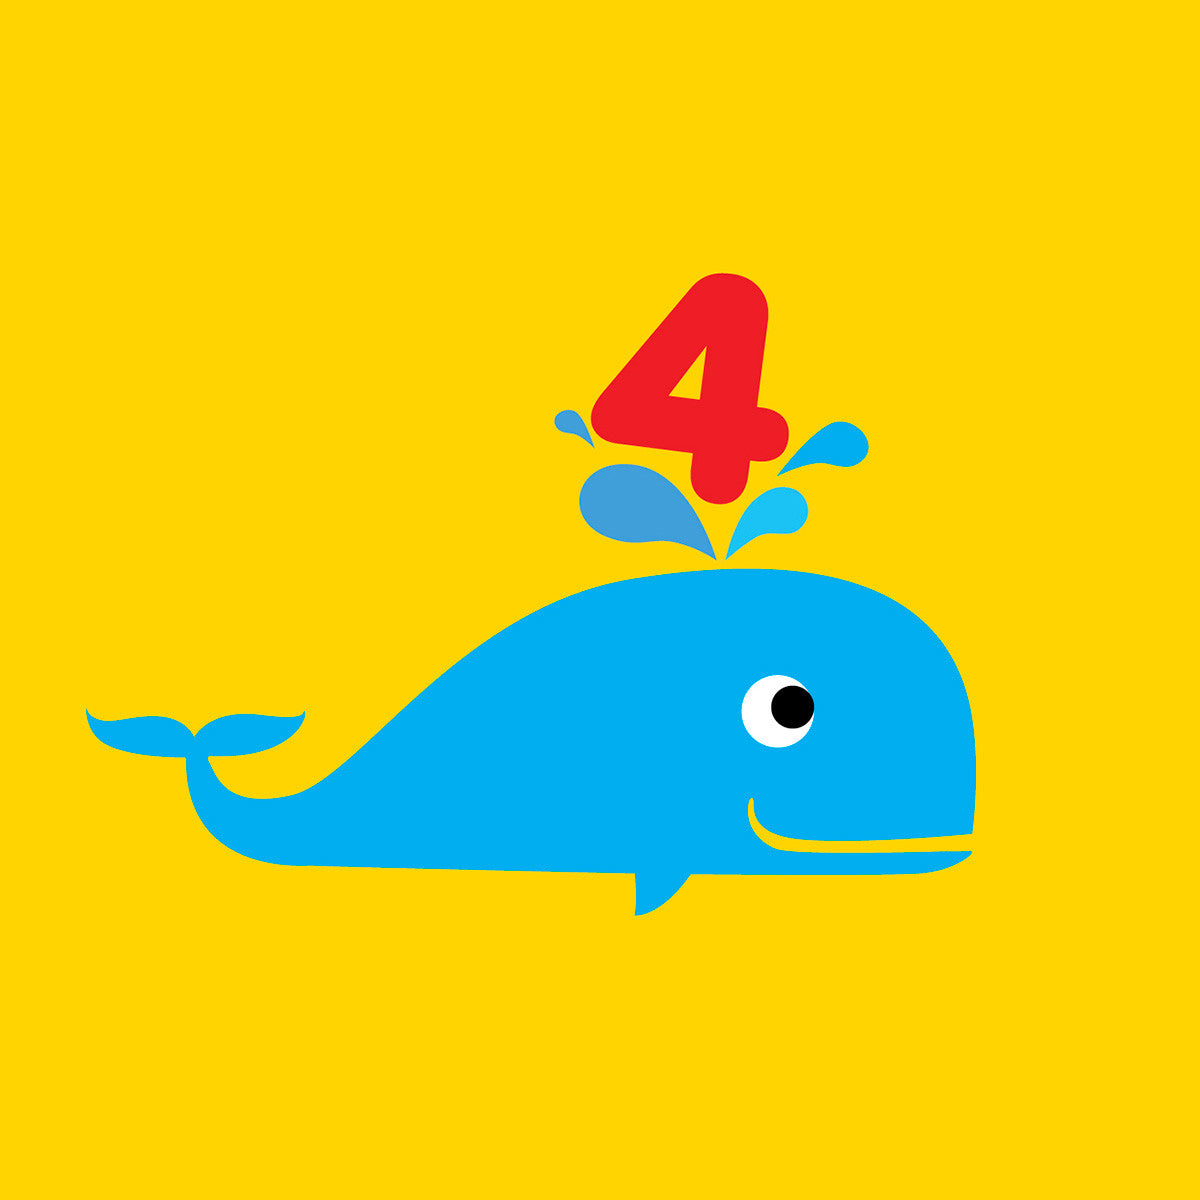 4 years old whale Birthday card